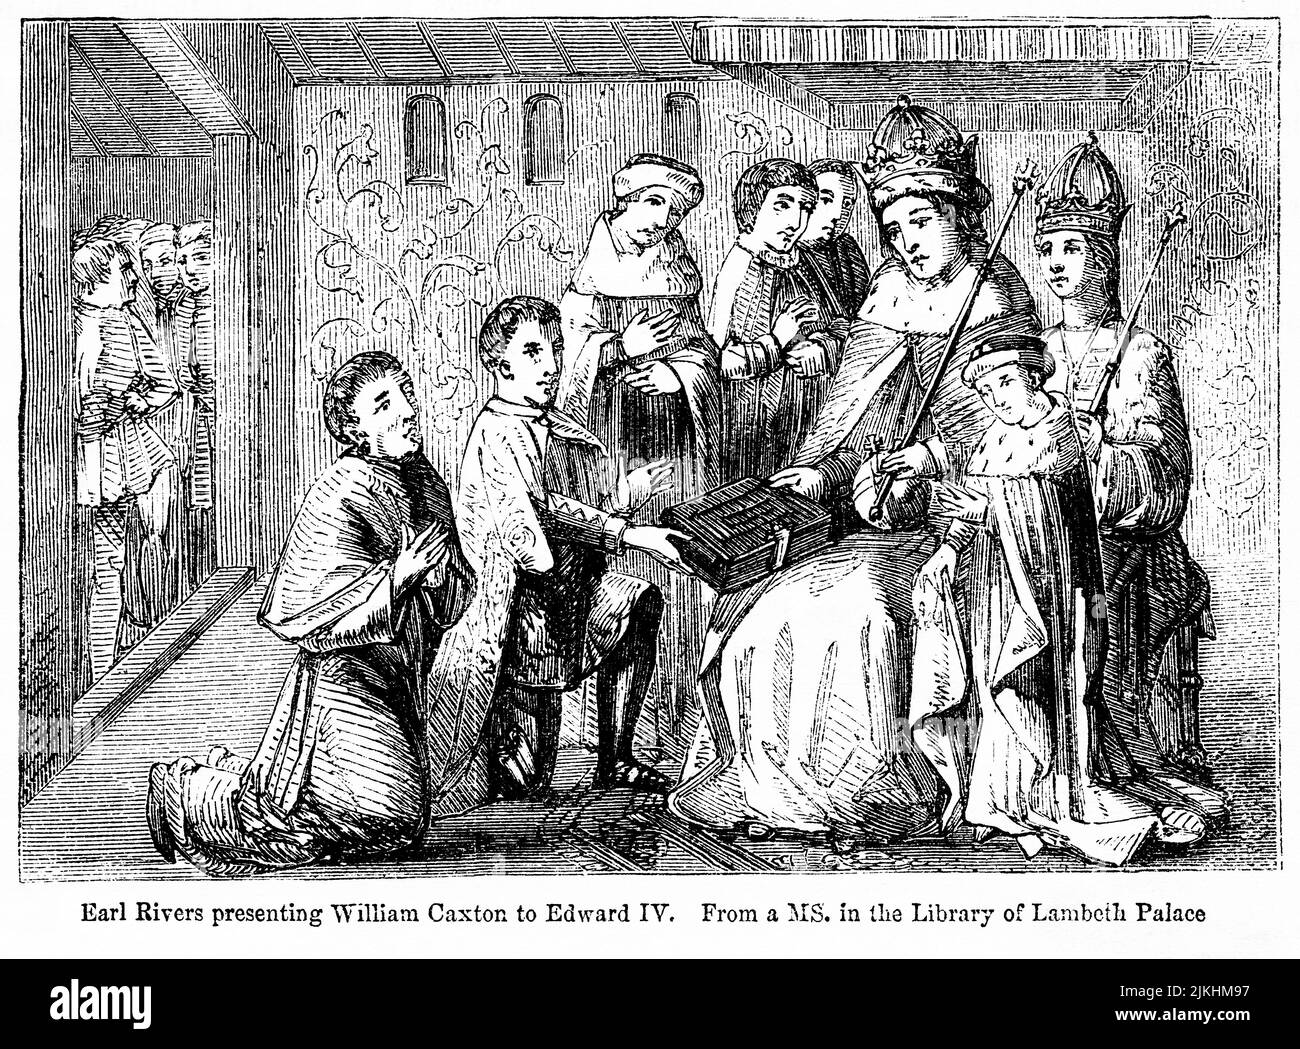 Earl Rivers presenting William Caxton to Edward IV, Illustration from the Book, 'John Cassel’s Illustrated History of England, Volume II', text by William Howitt, Cassell, Petter, and Galpin, London, 1858 Stock Photo